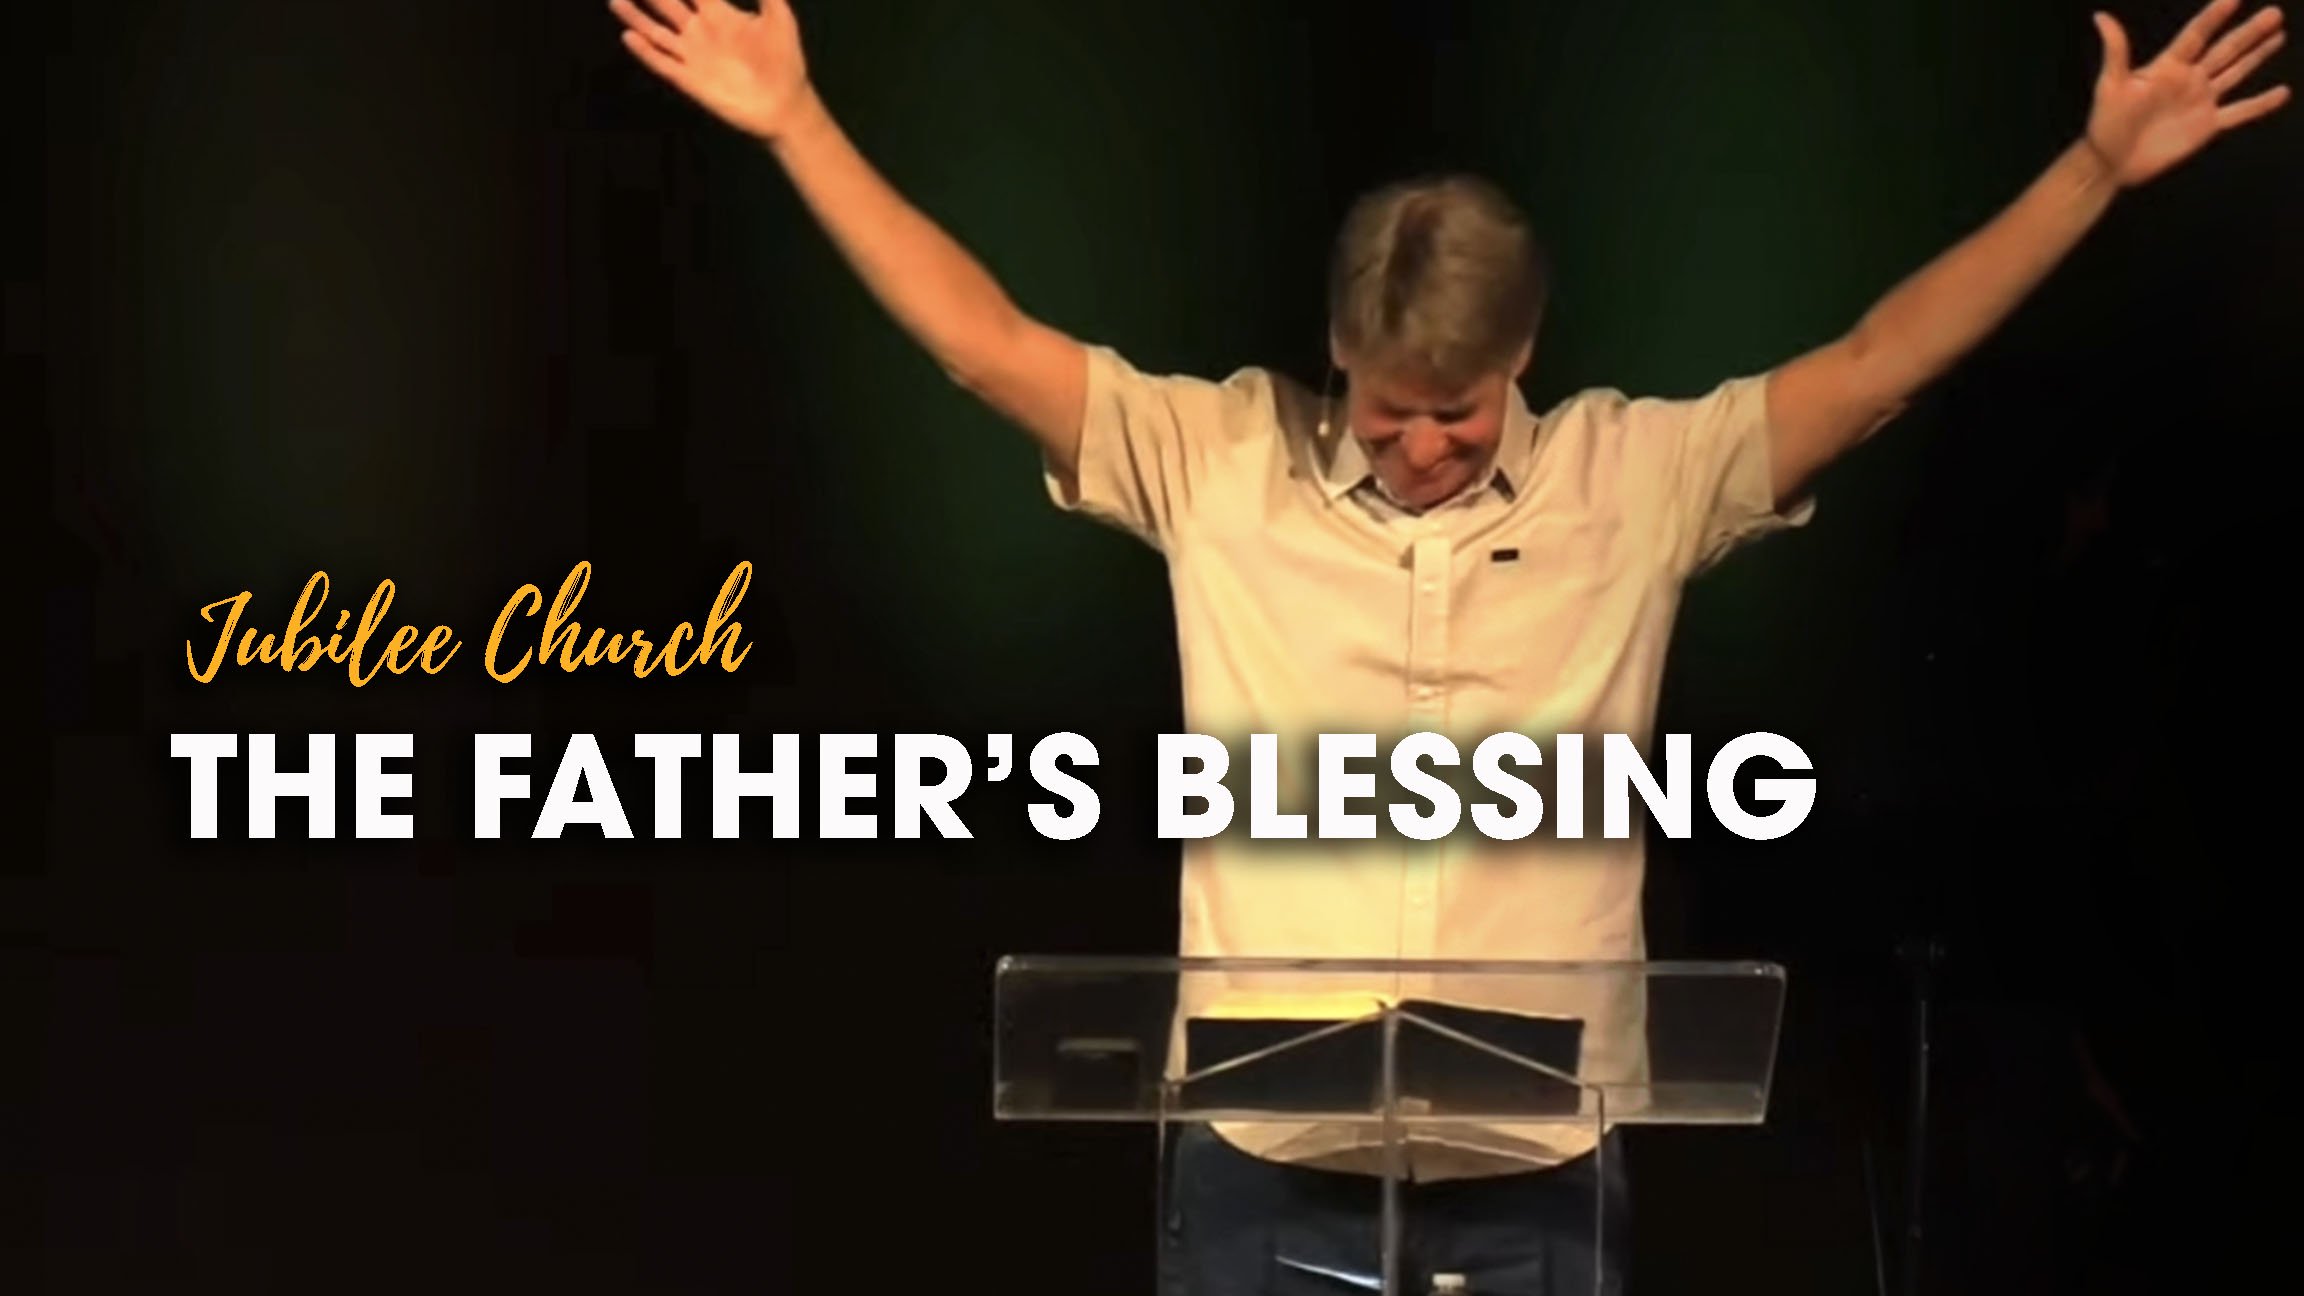 The Father’s Blessing